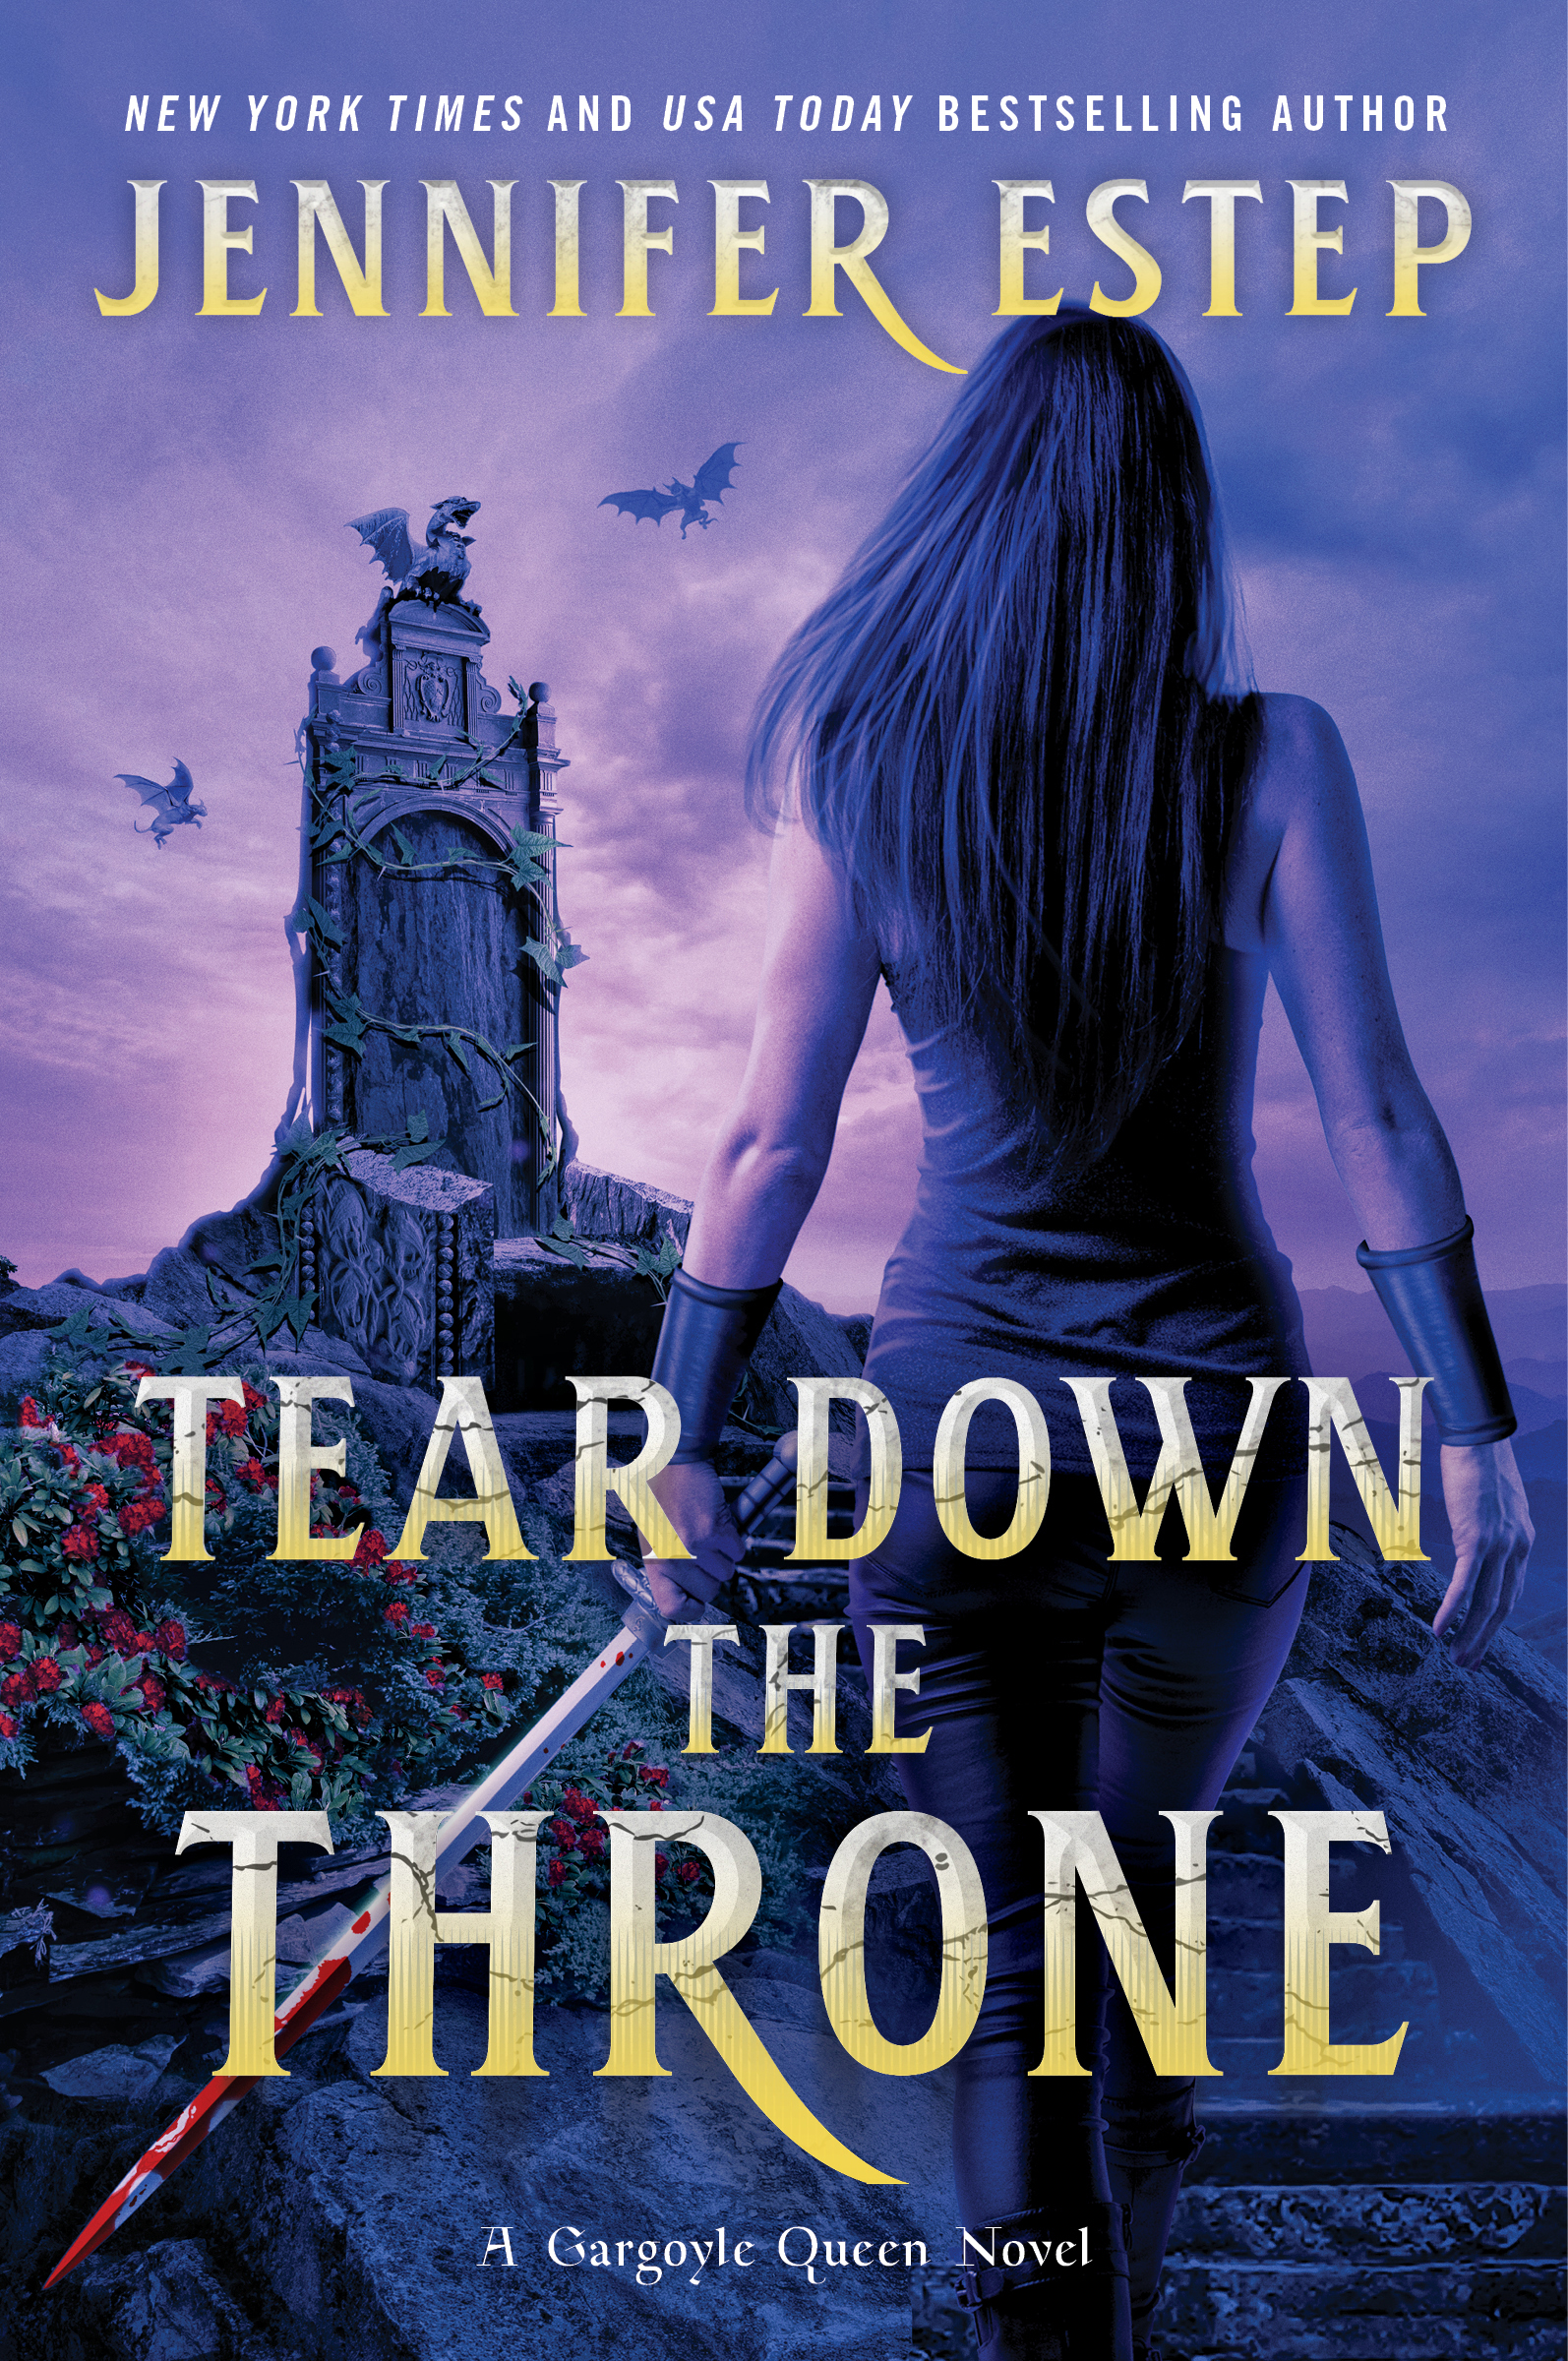 Tear Down the Throne purple cover art with woman holding a sword in front of a throne